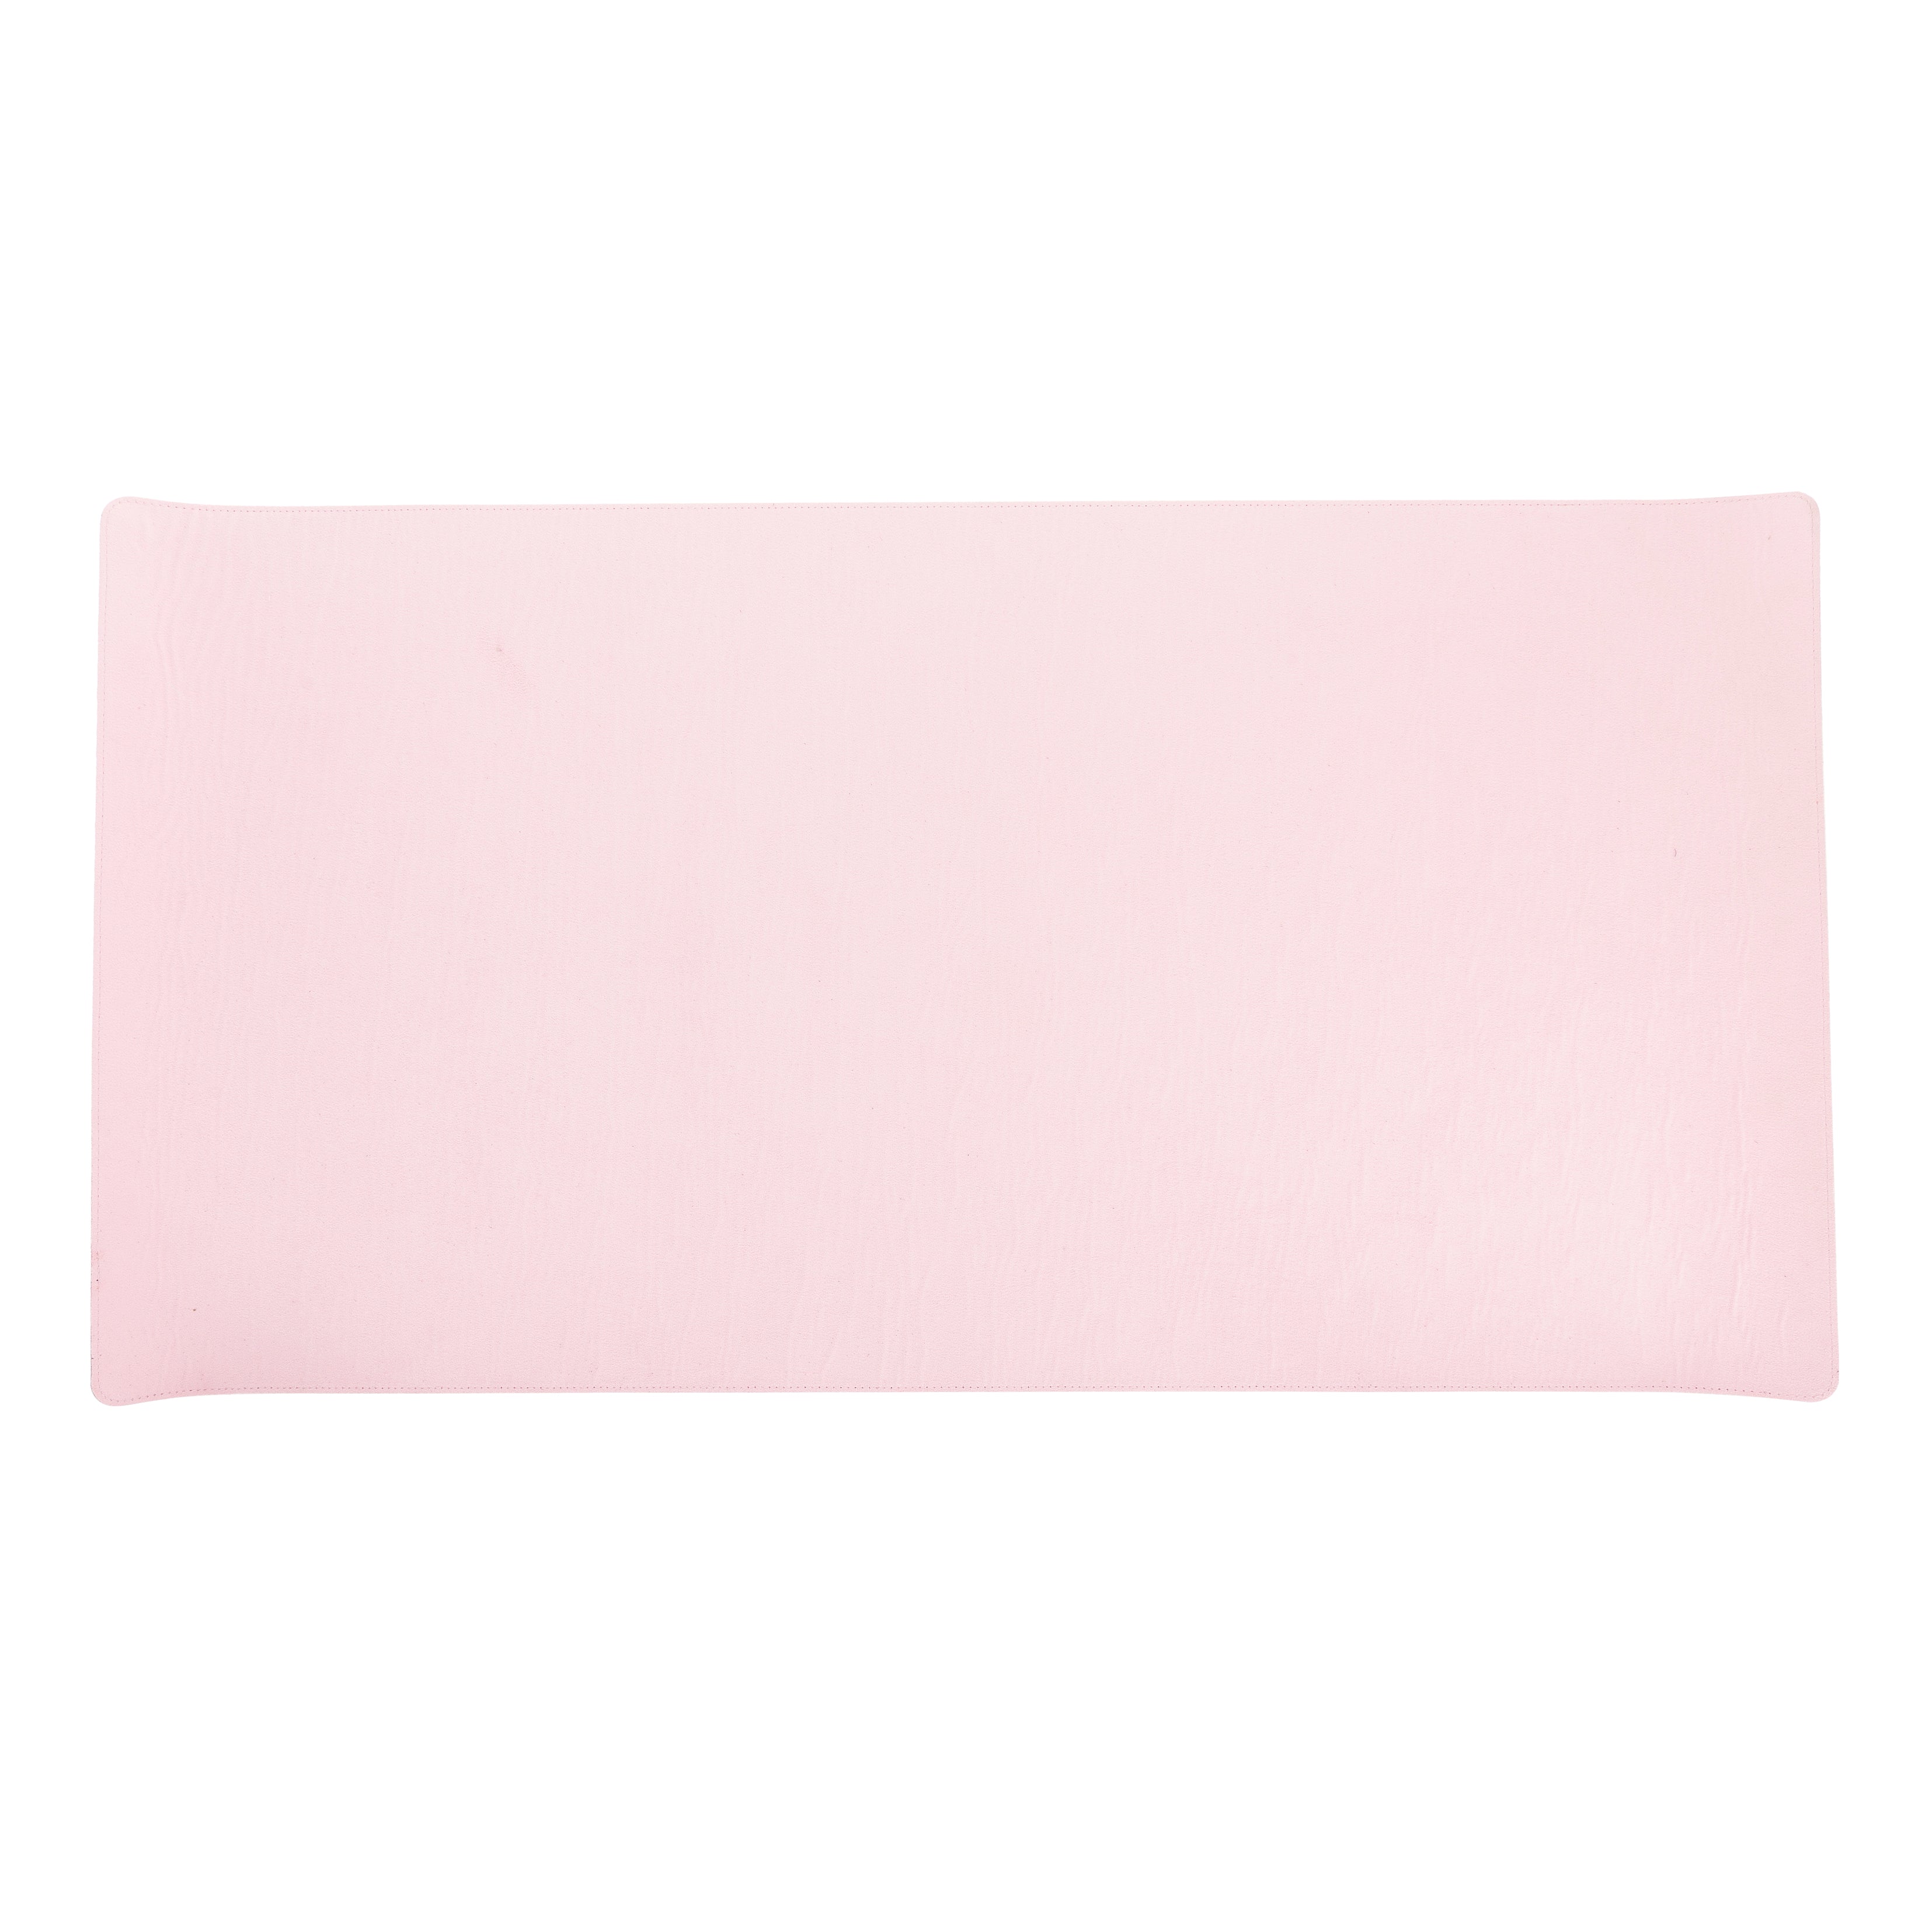 LupinnyLeather Genuine Leather Deskmat, Computer Pad, Office Desk Pad (Pink Nude) 9